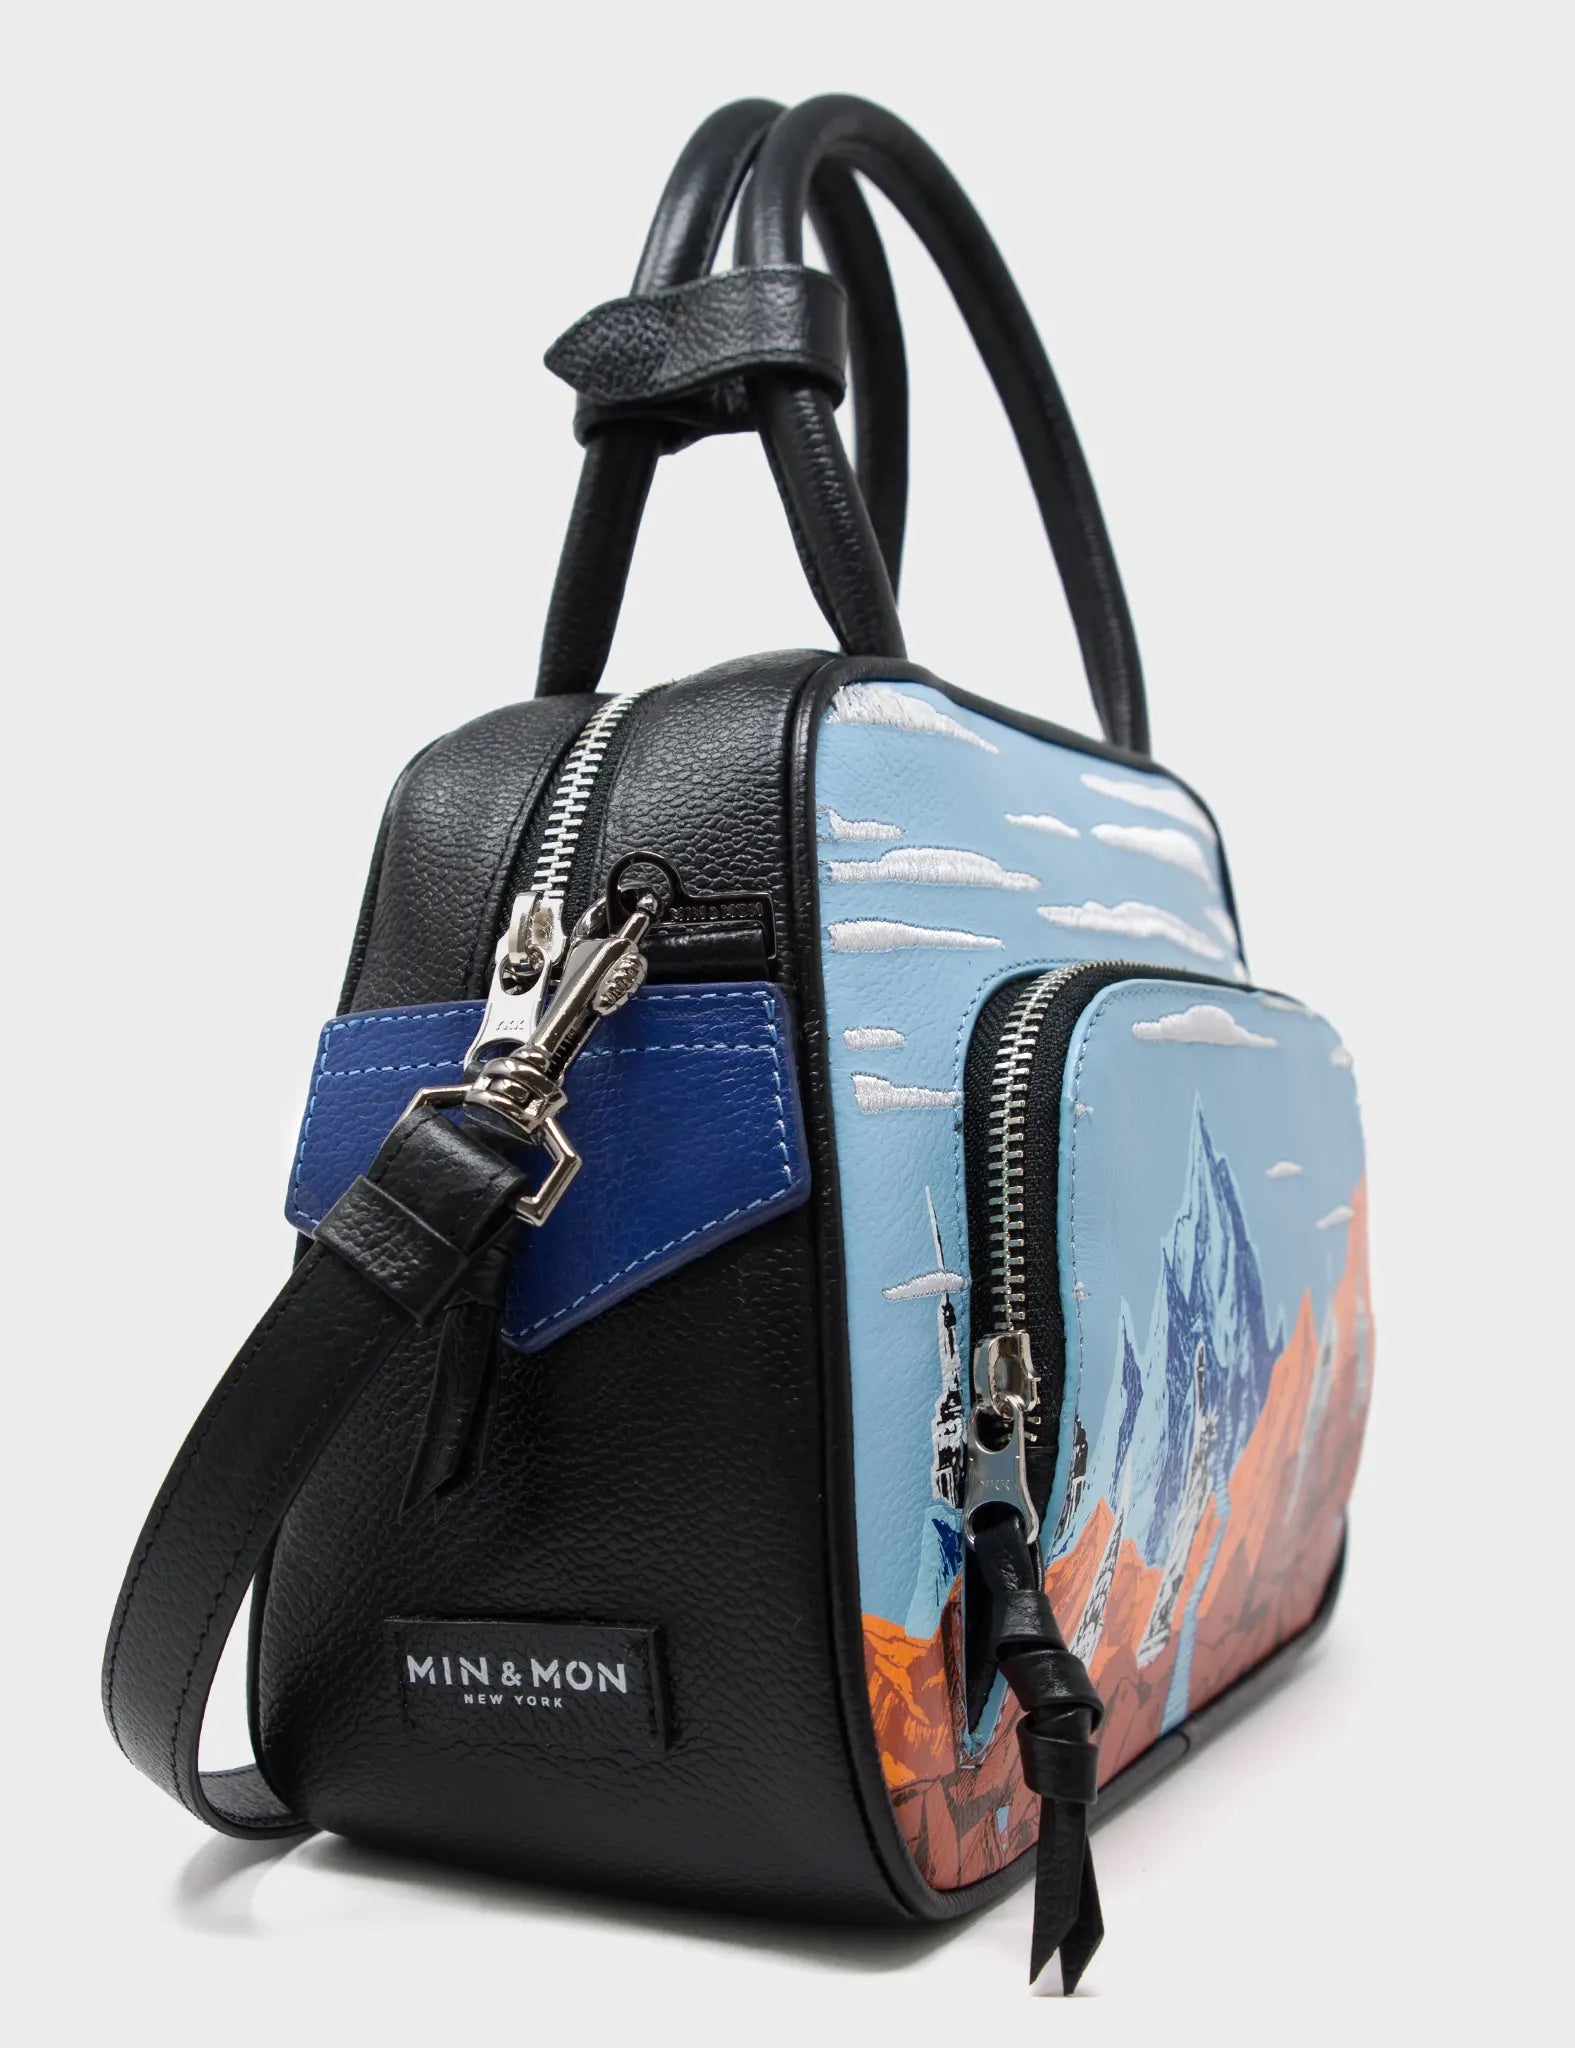 Blue Crossbody Leather Bag - Mountains, Flowers and Clouds Design - Side